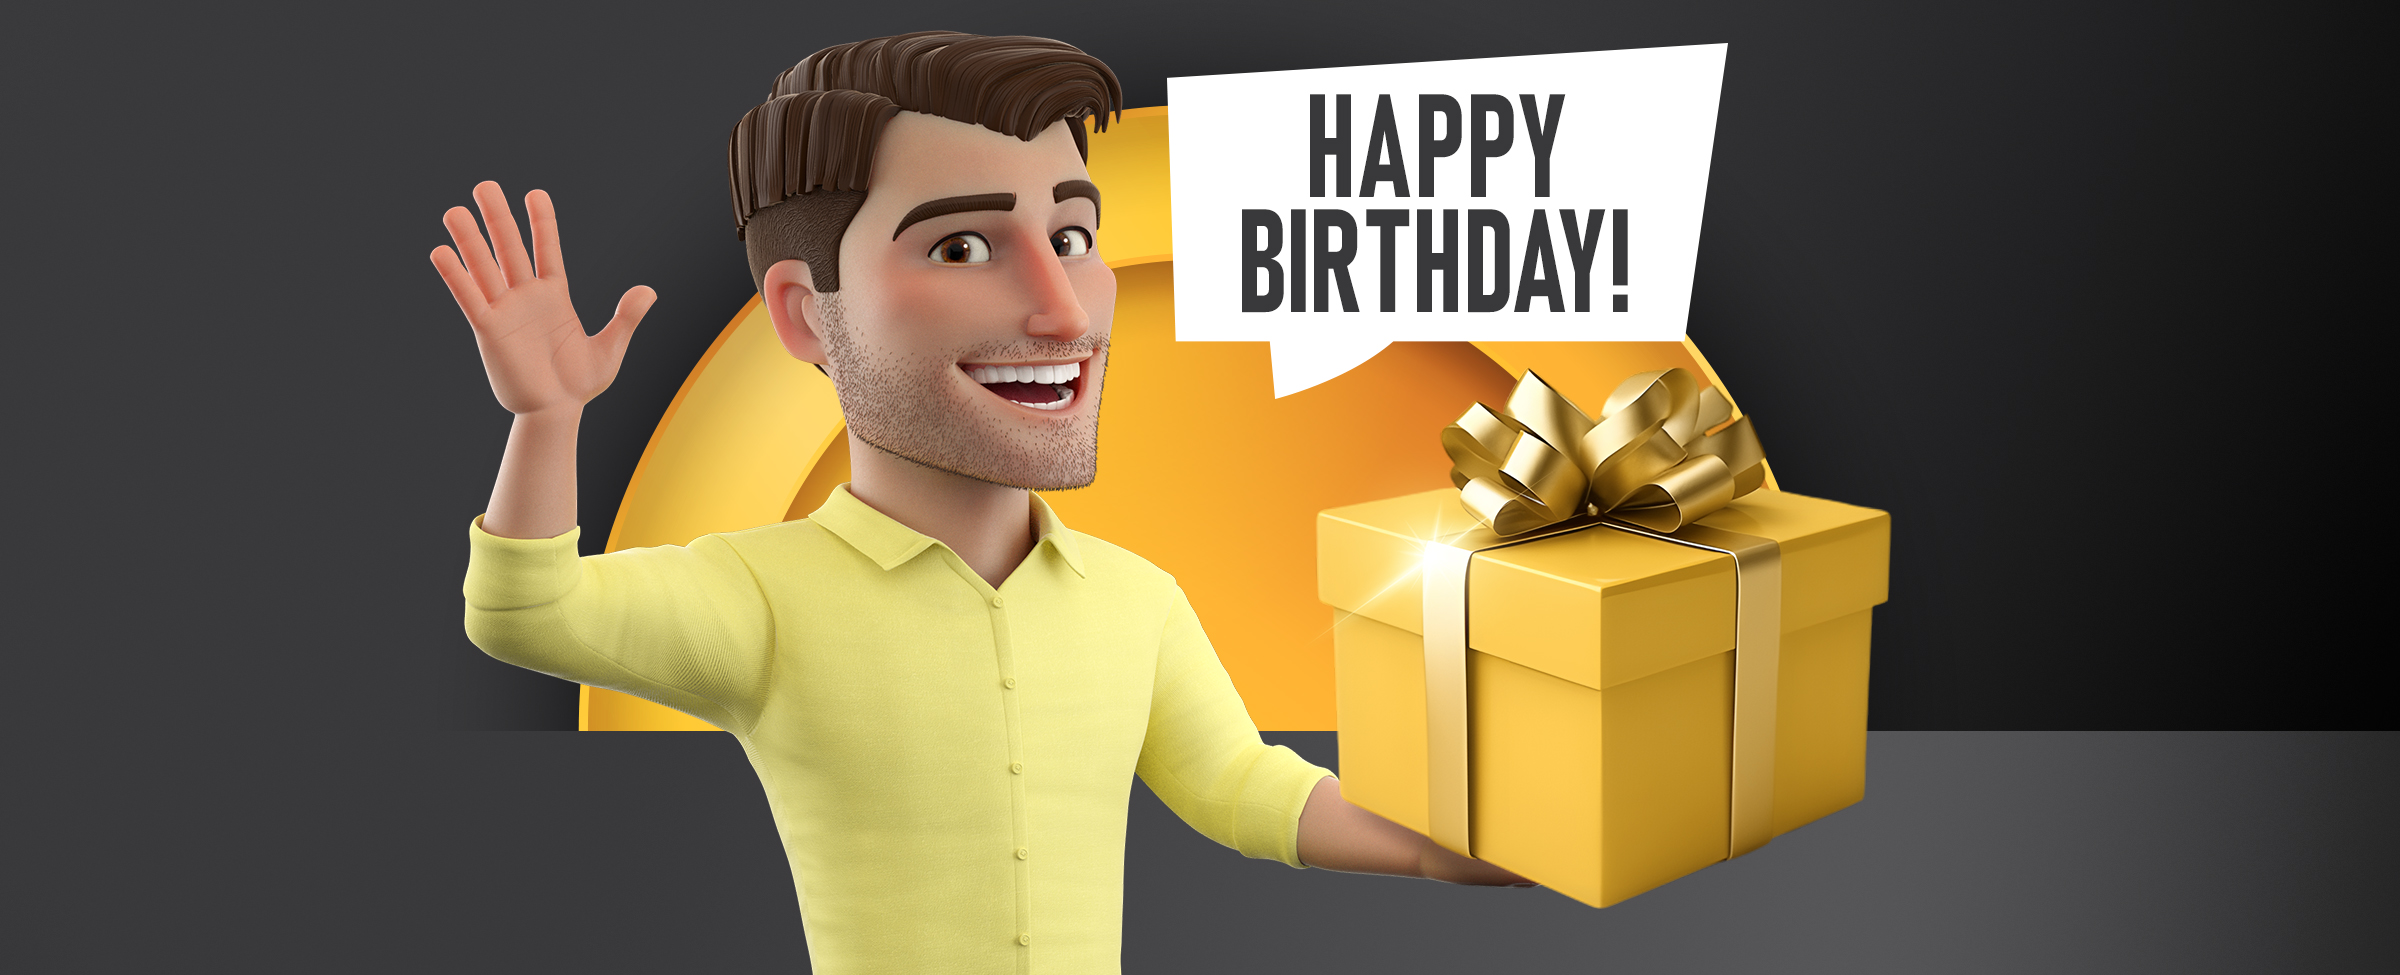 A male animation character is holding a gift wrapped parcel and waving. A speech bubble reads ‘Happy Birthday’’. On a dark background.